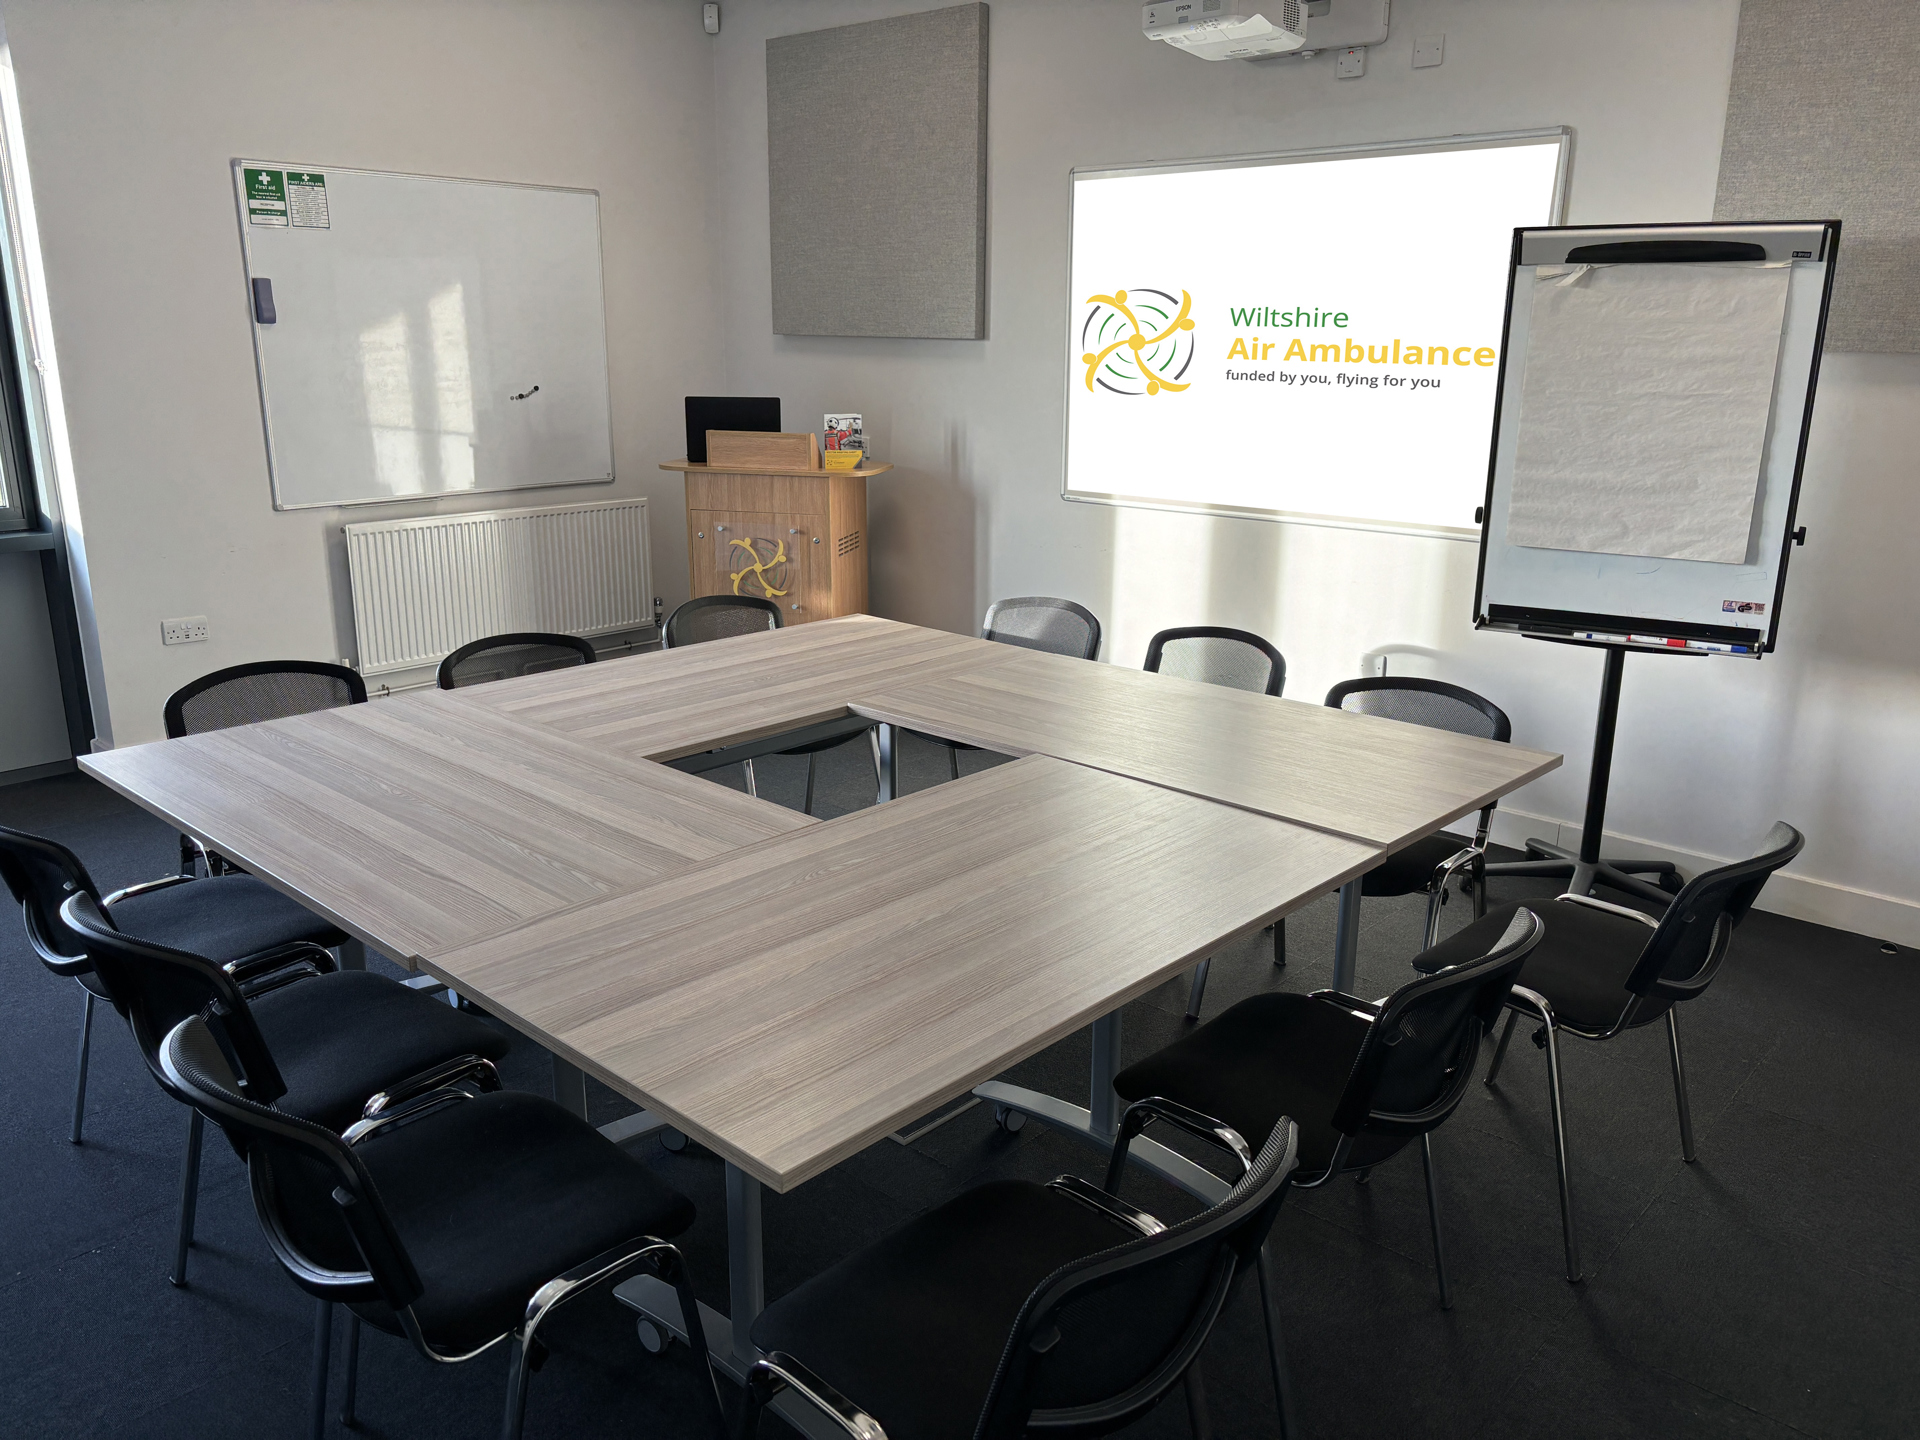 A photo of a hollow square table set up in a small meeting room